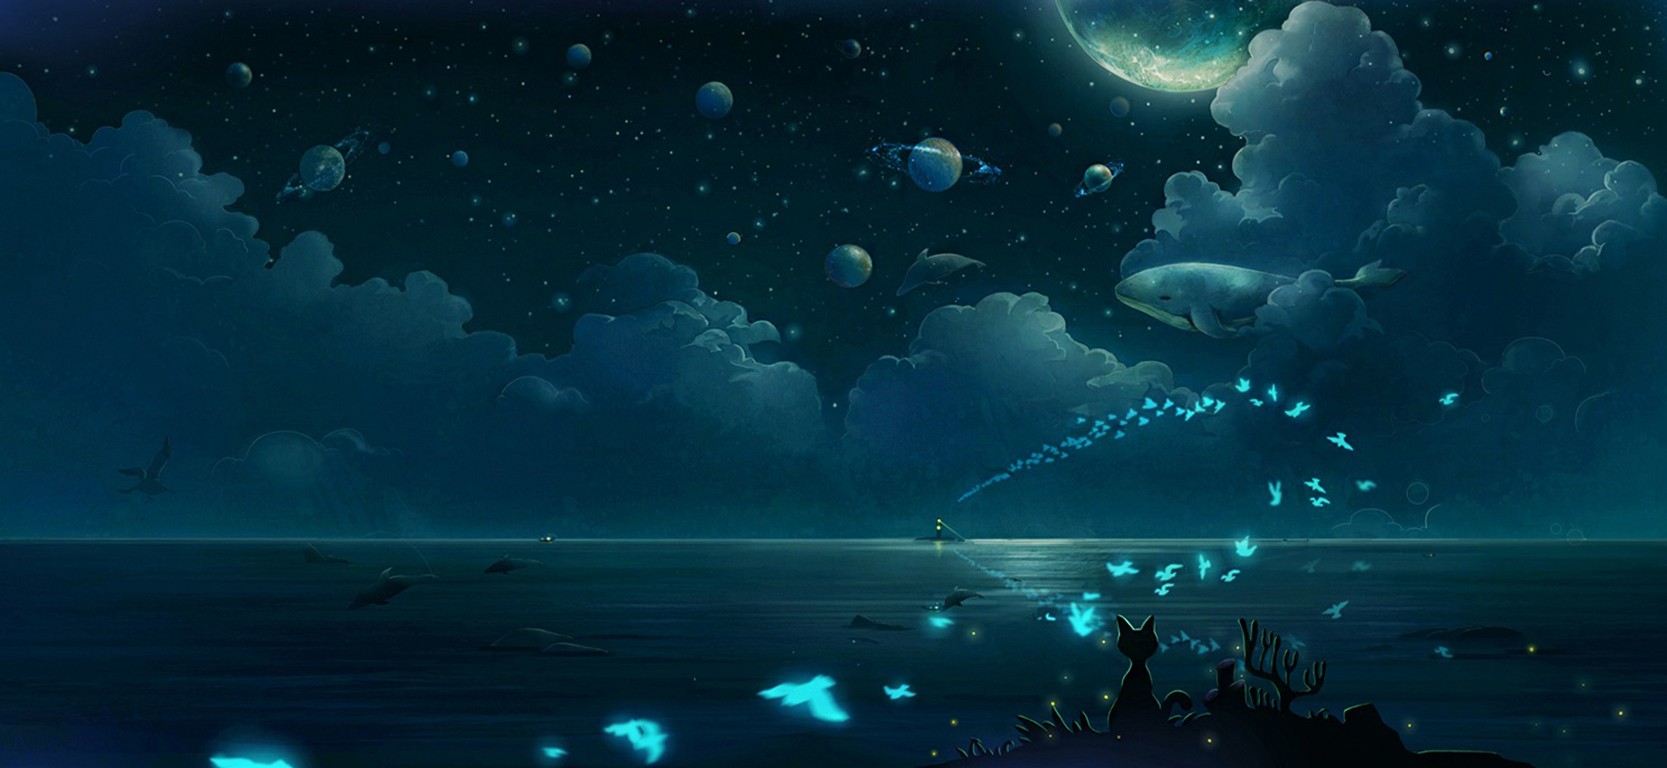 General 1667x768 butterfly clouds night planet whale cats fish animals birds digital art sky sea